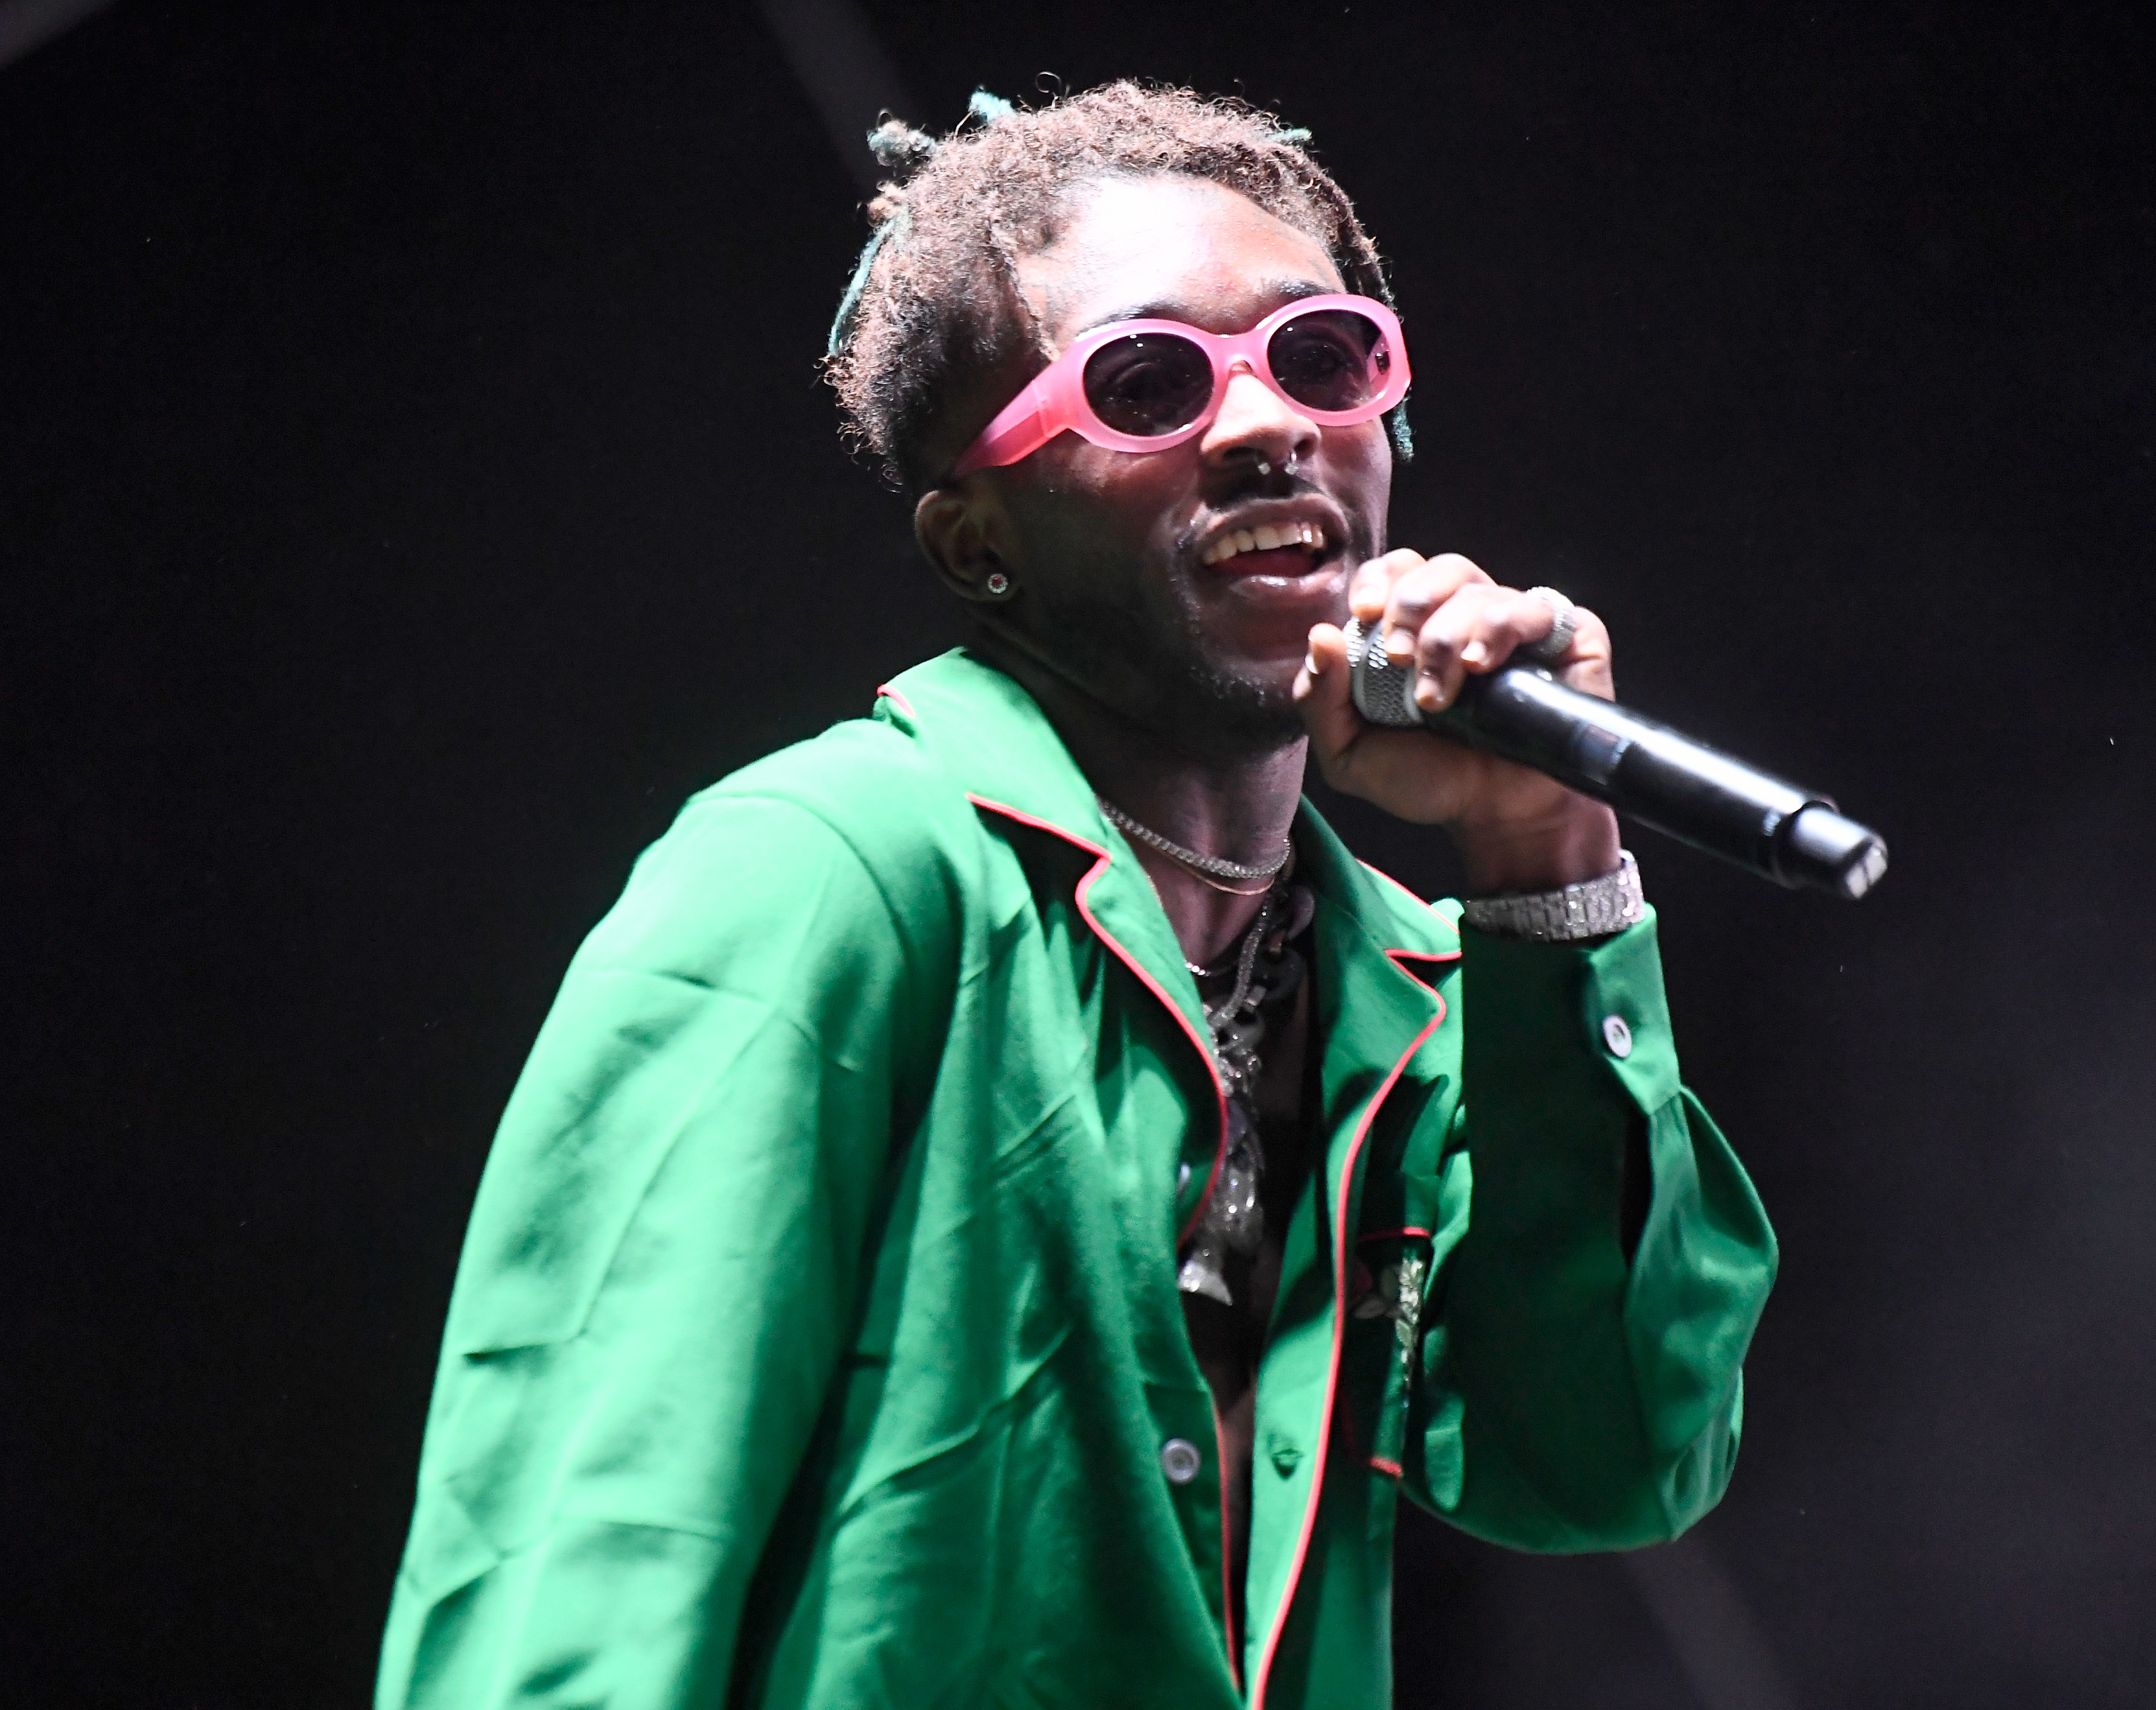 Offset Confirms Lil Uzi Vert Verse To Be Added To “Pink Toes”